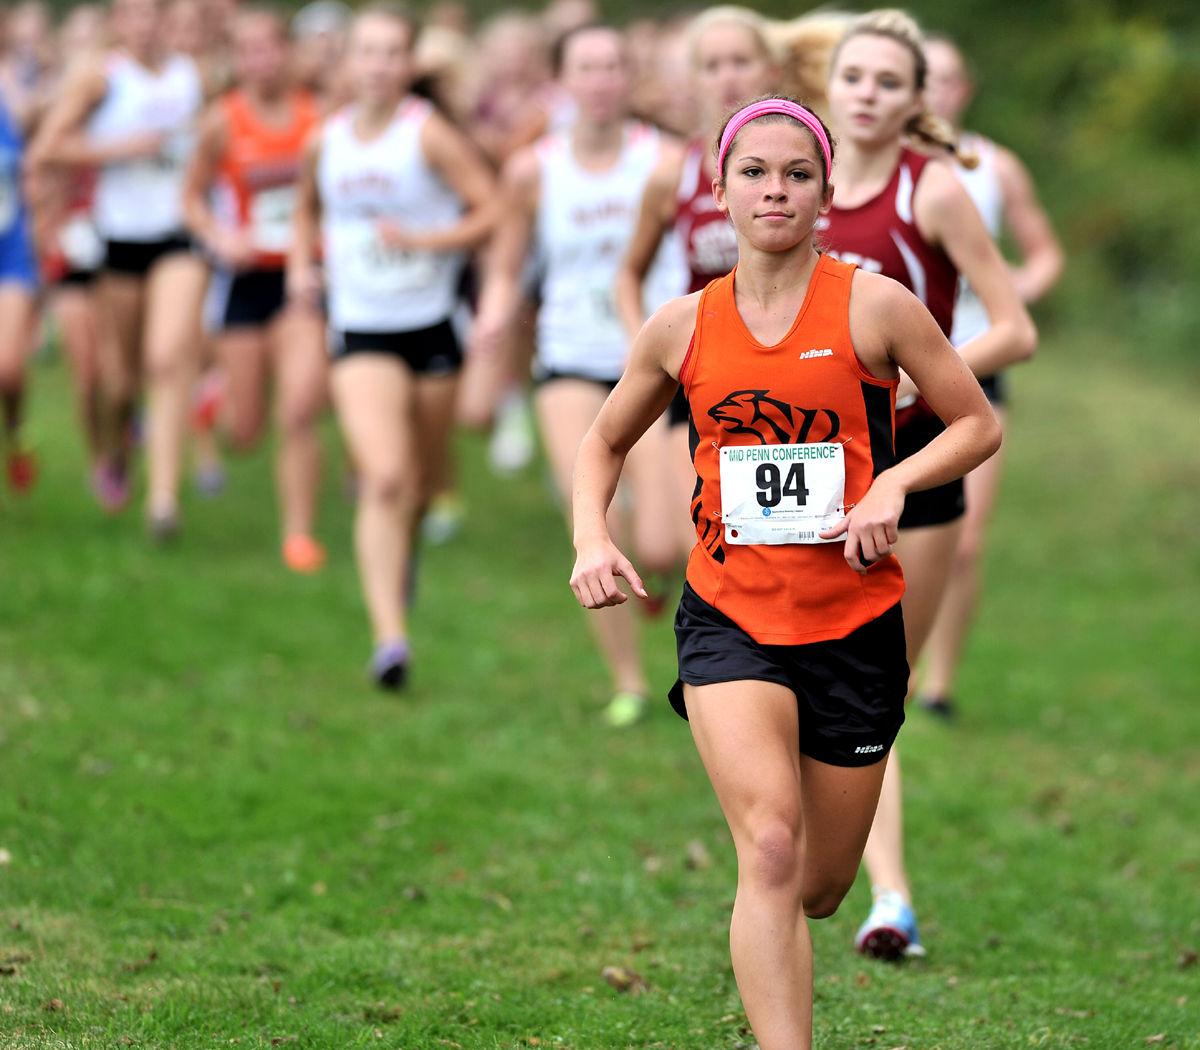 MidPenn Cross Country Cumberland Valley's Mady Clahane wins third